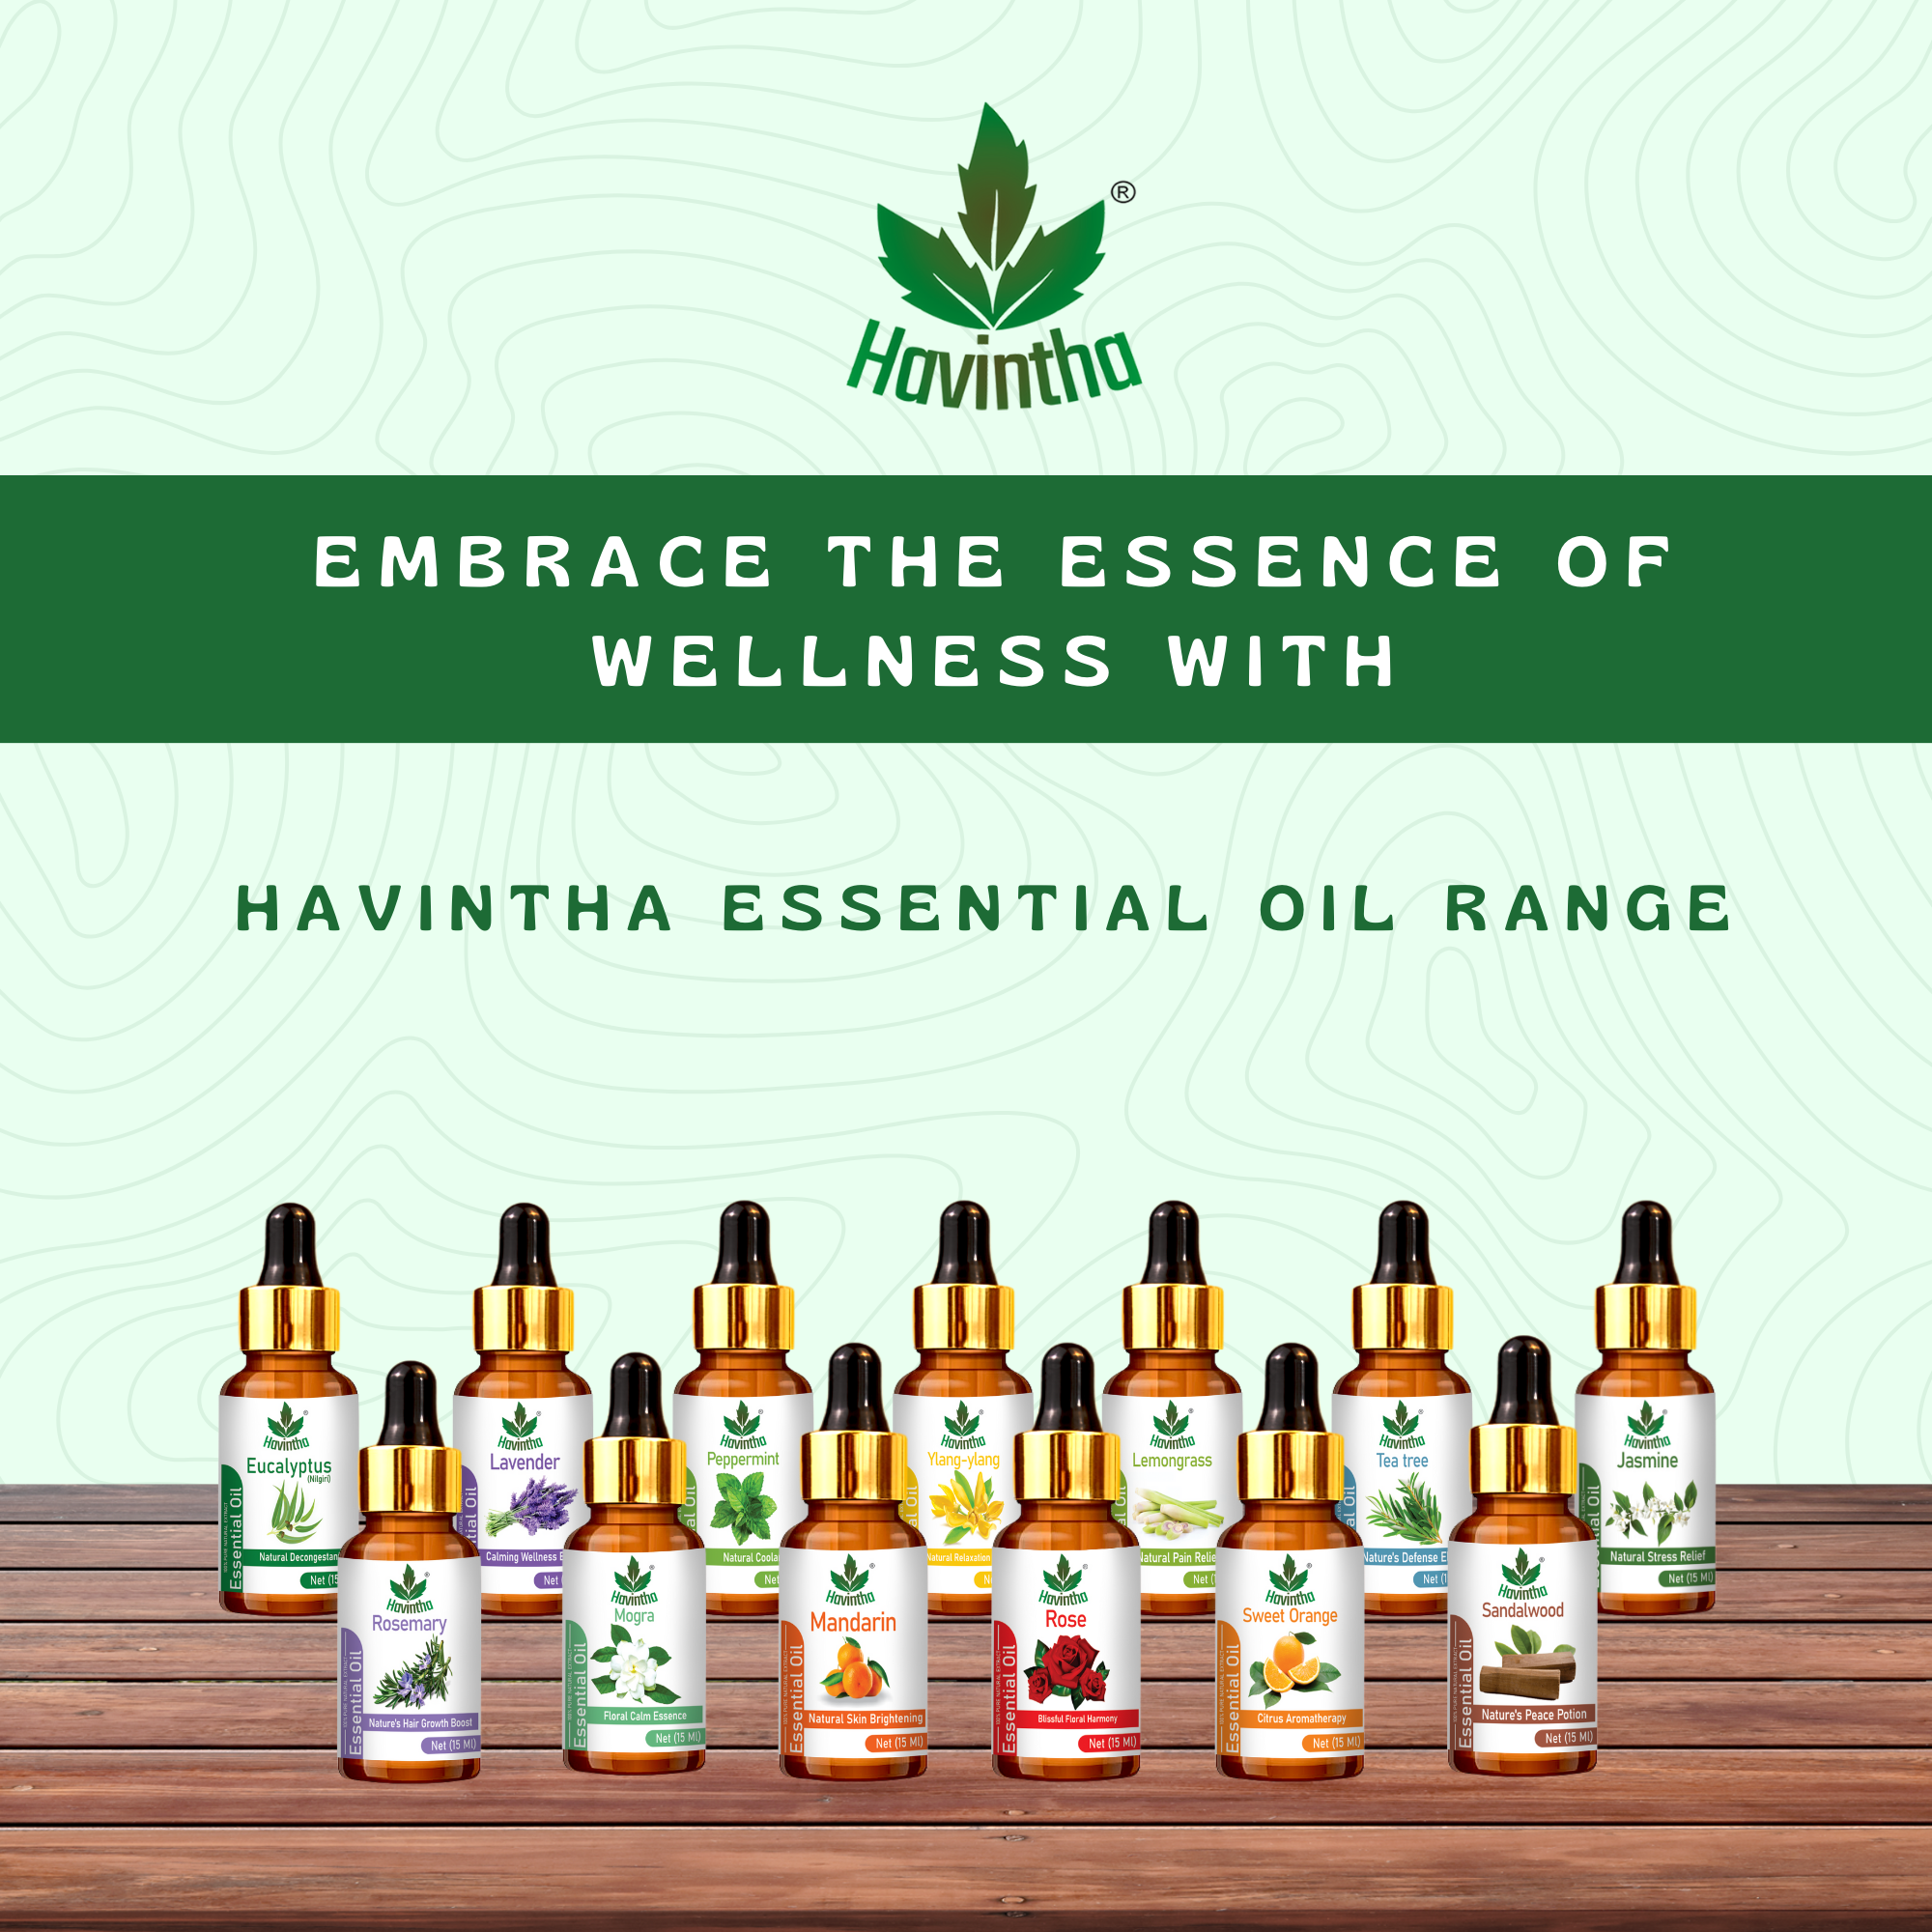 Havintha Pure and Organic Jasmine Essential Oil for Skin, Hair and Aromatherapy - 15 ml.